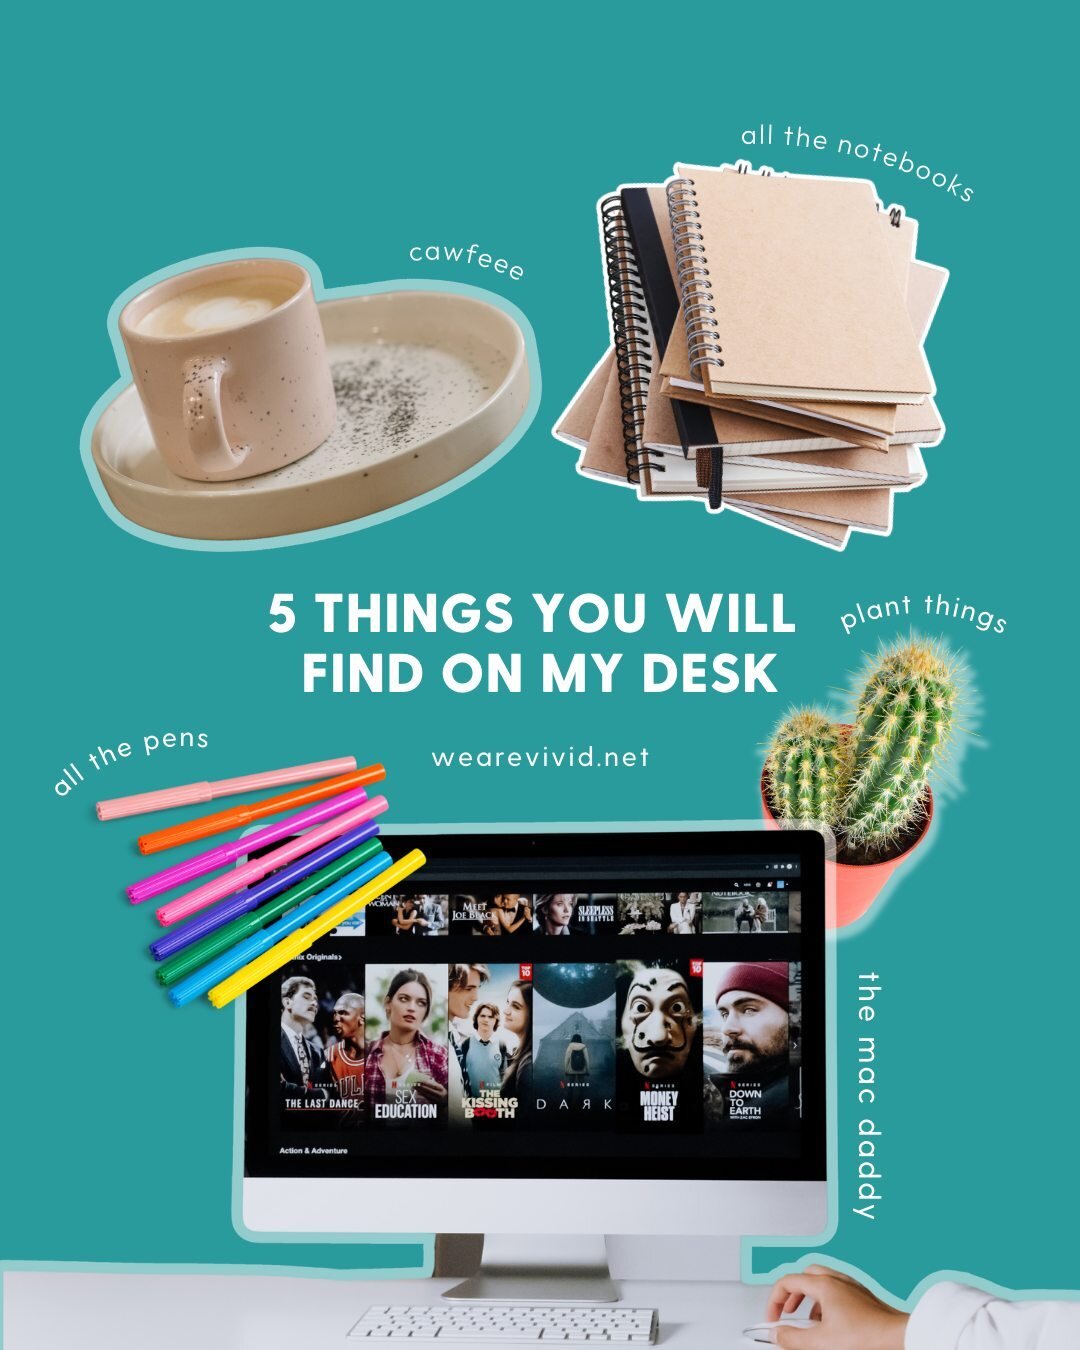 Welcome to my chaotic yet oh-so-inspiring workspace. Here are 5 things you'll always find on my desk ⚡

Empty Cups Galore : Coffee is my fuel, and let's just say, I've got a bit of a collection going on here. Don't judge me; it's the secret behind th